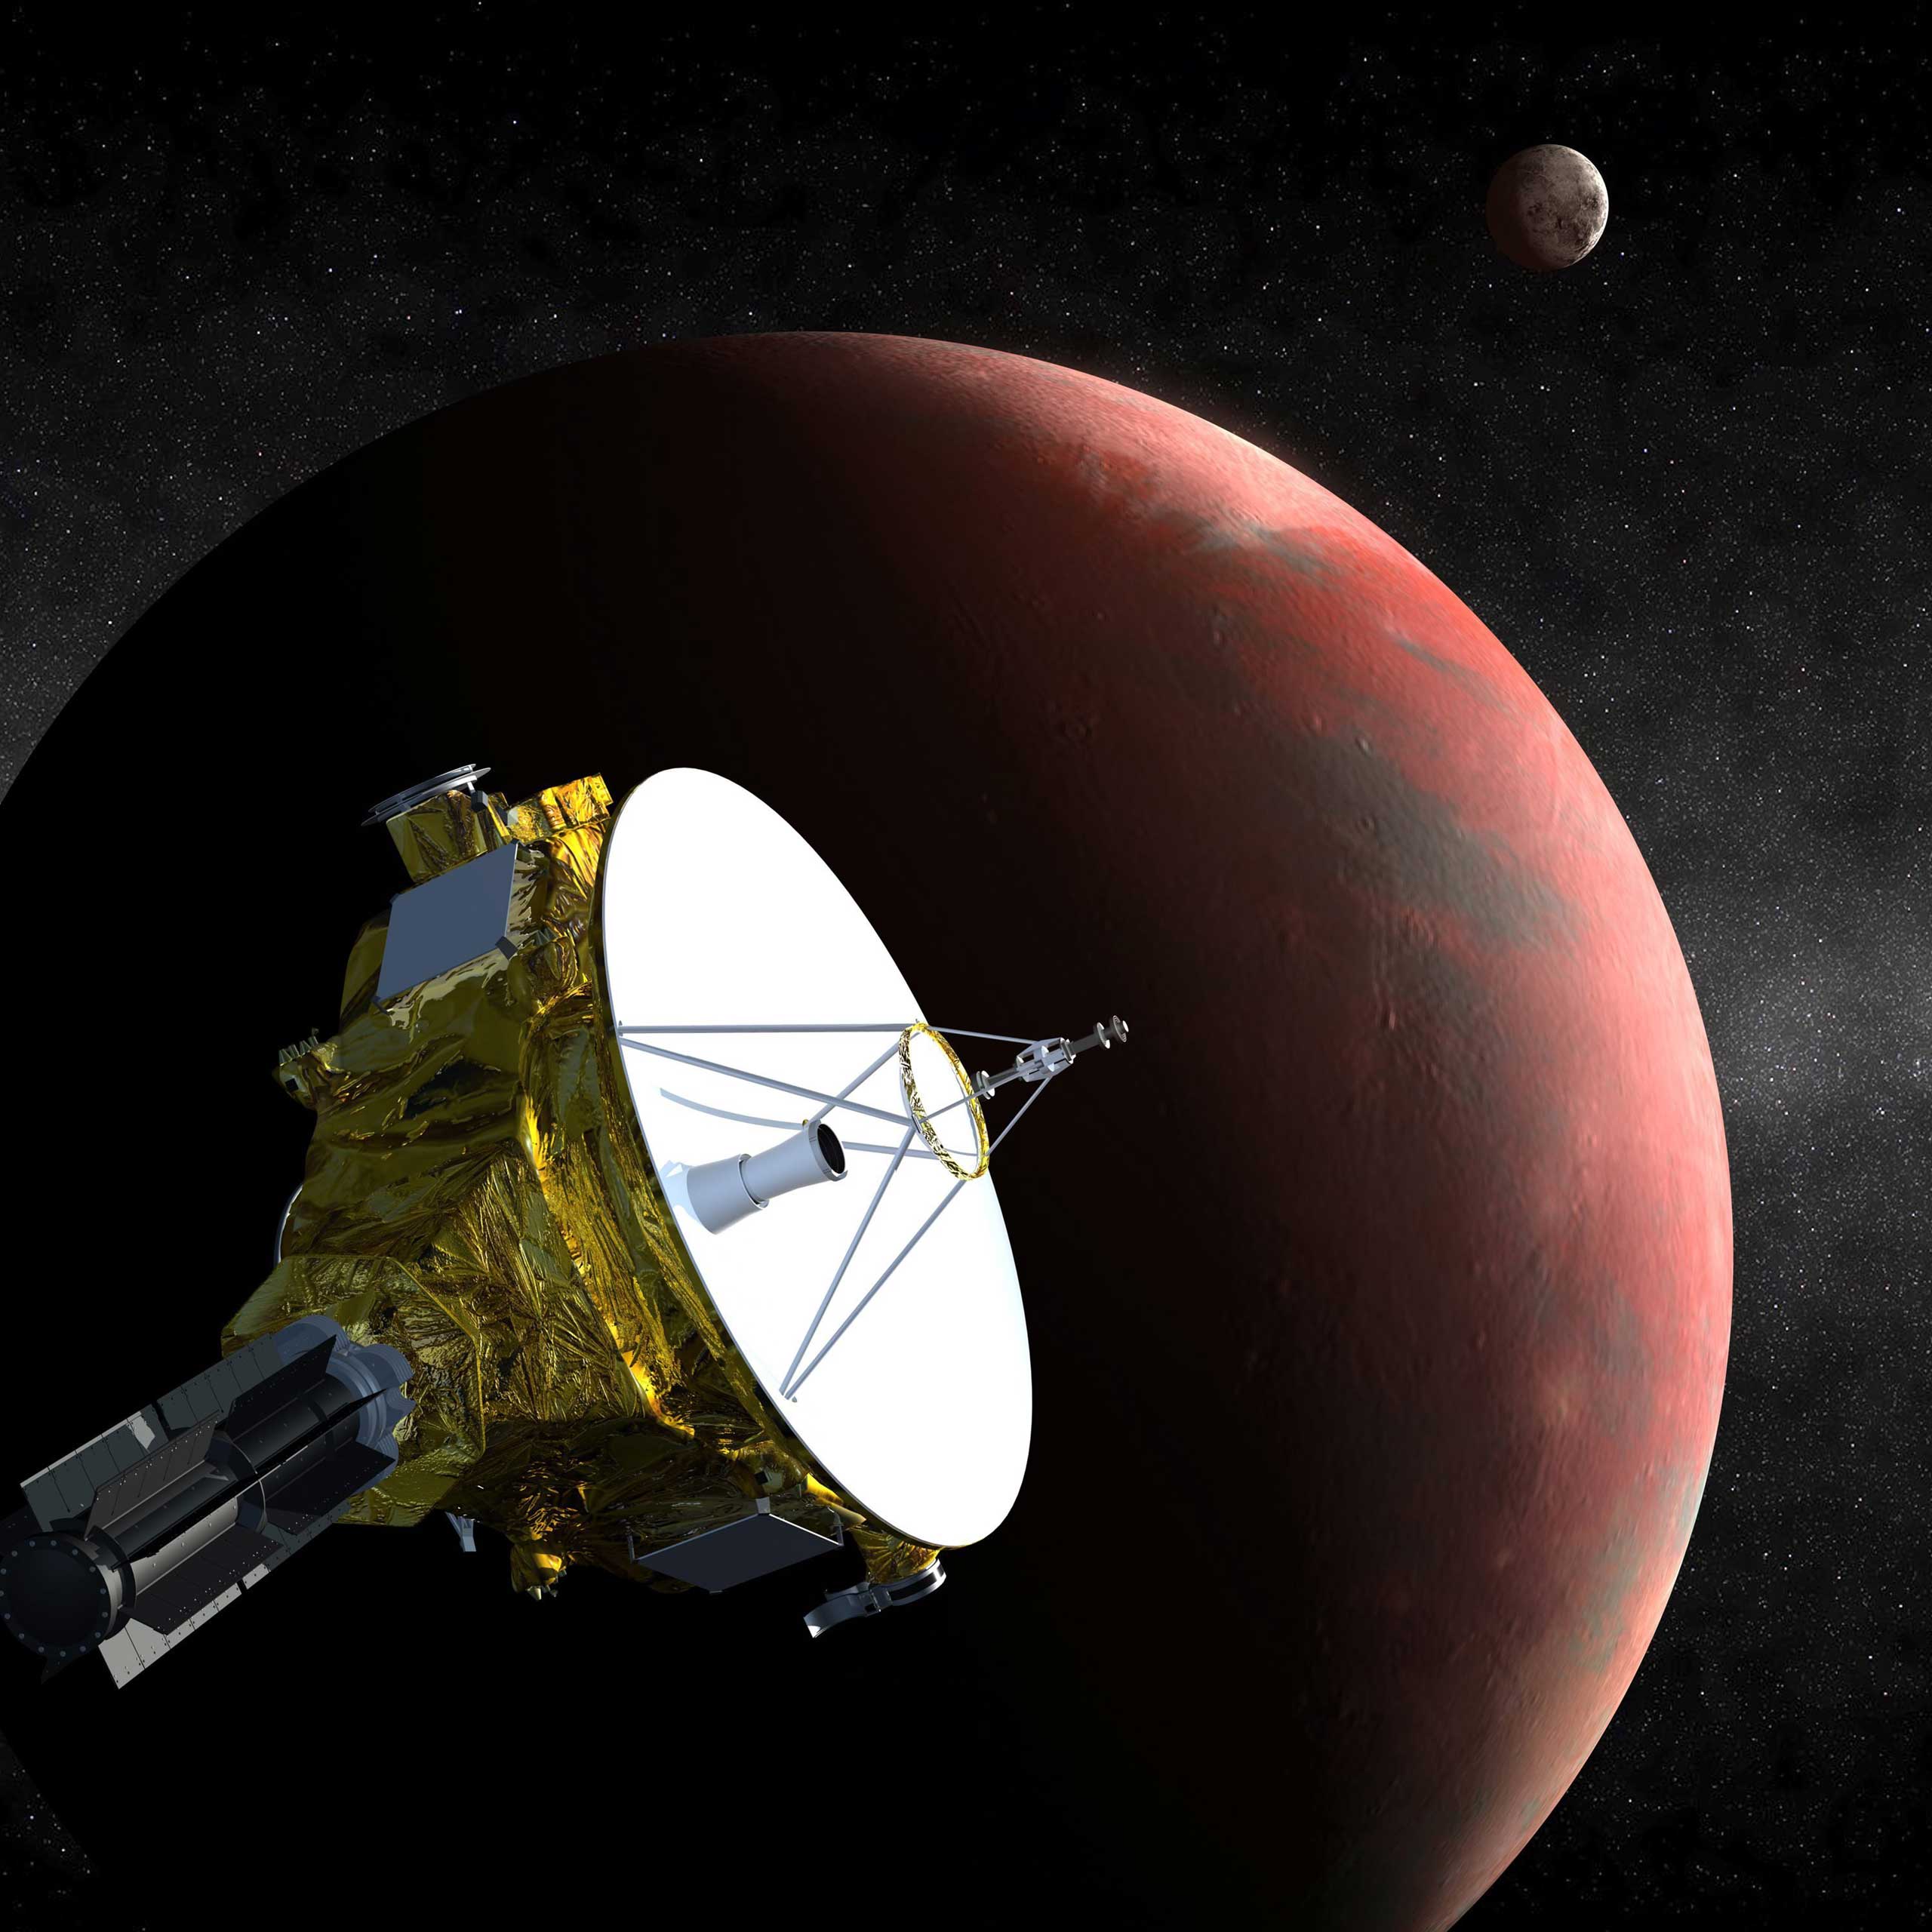 An undated artist's concept shows the New Horizons spacecraft as it approaches Pluto and its largest moon, Charon. (NASA/EPA)